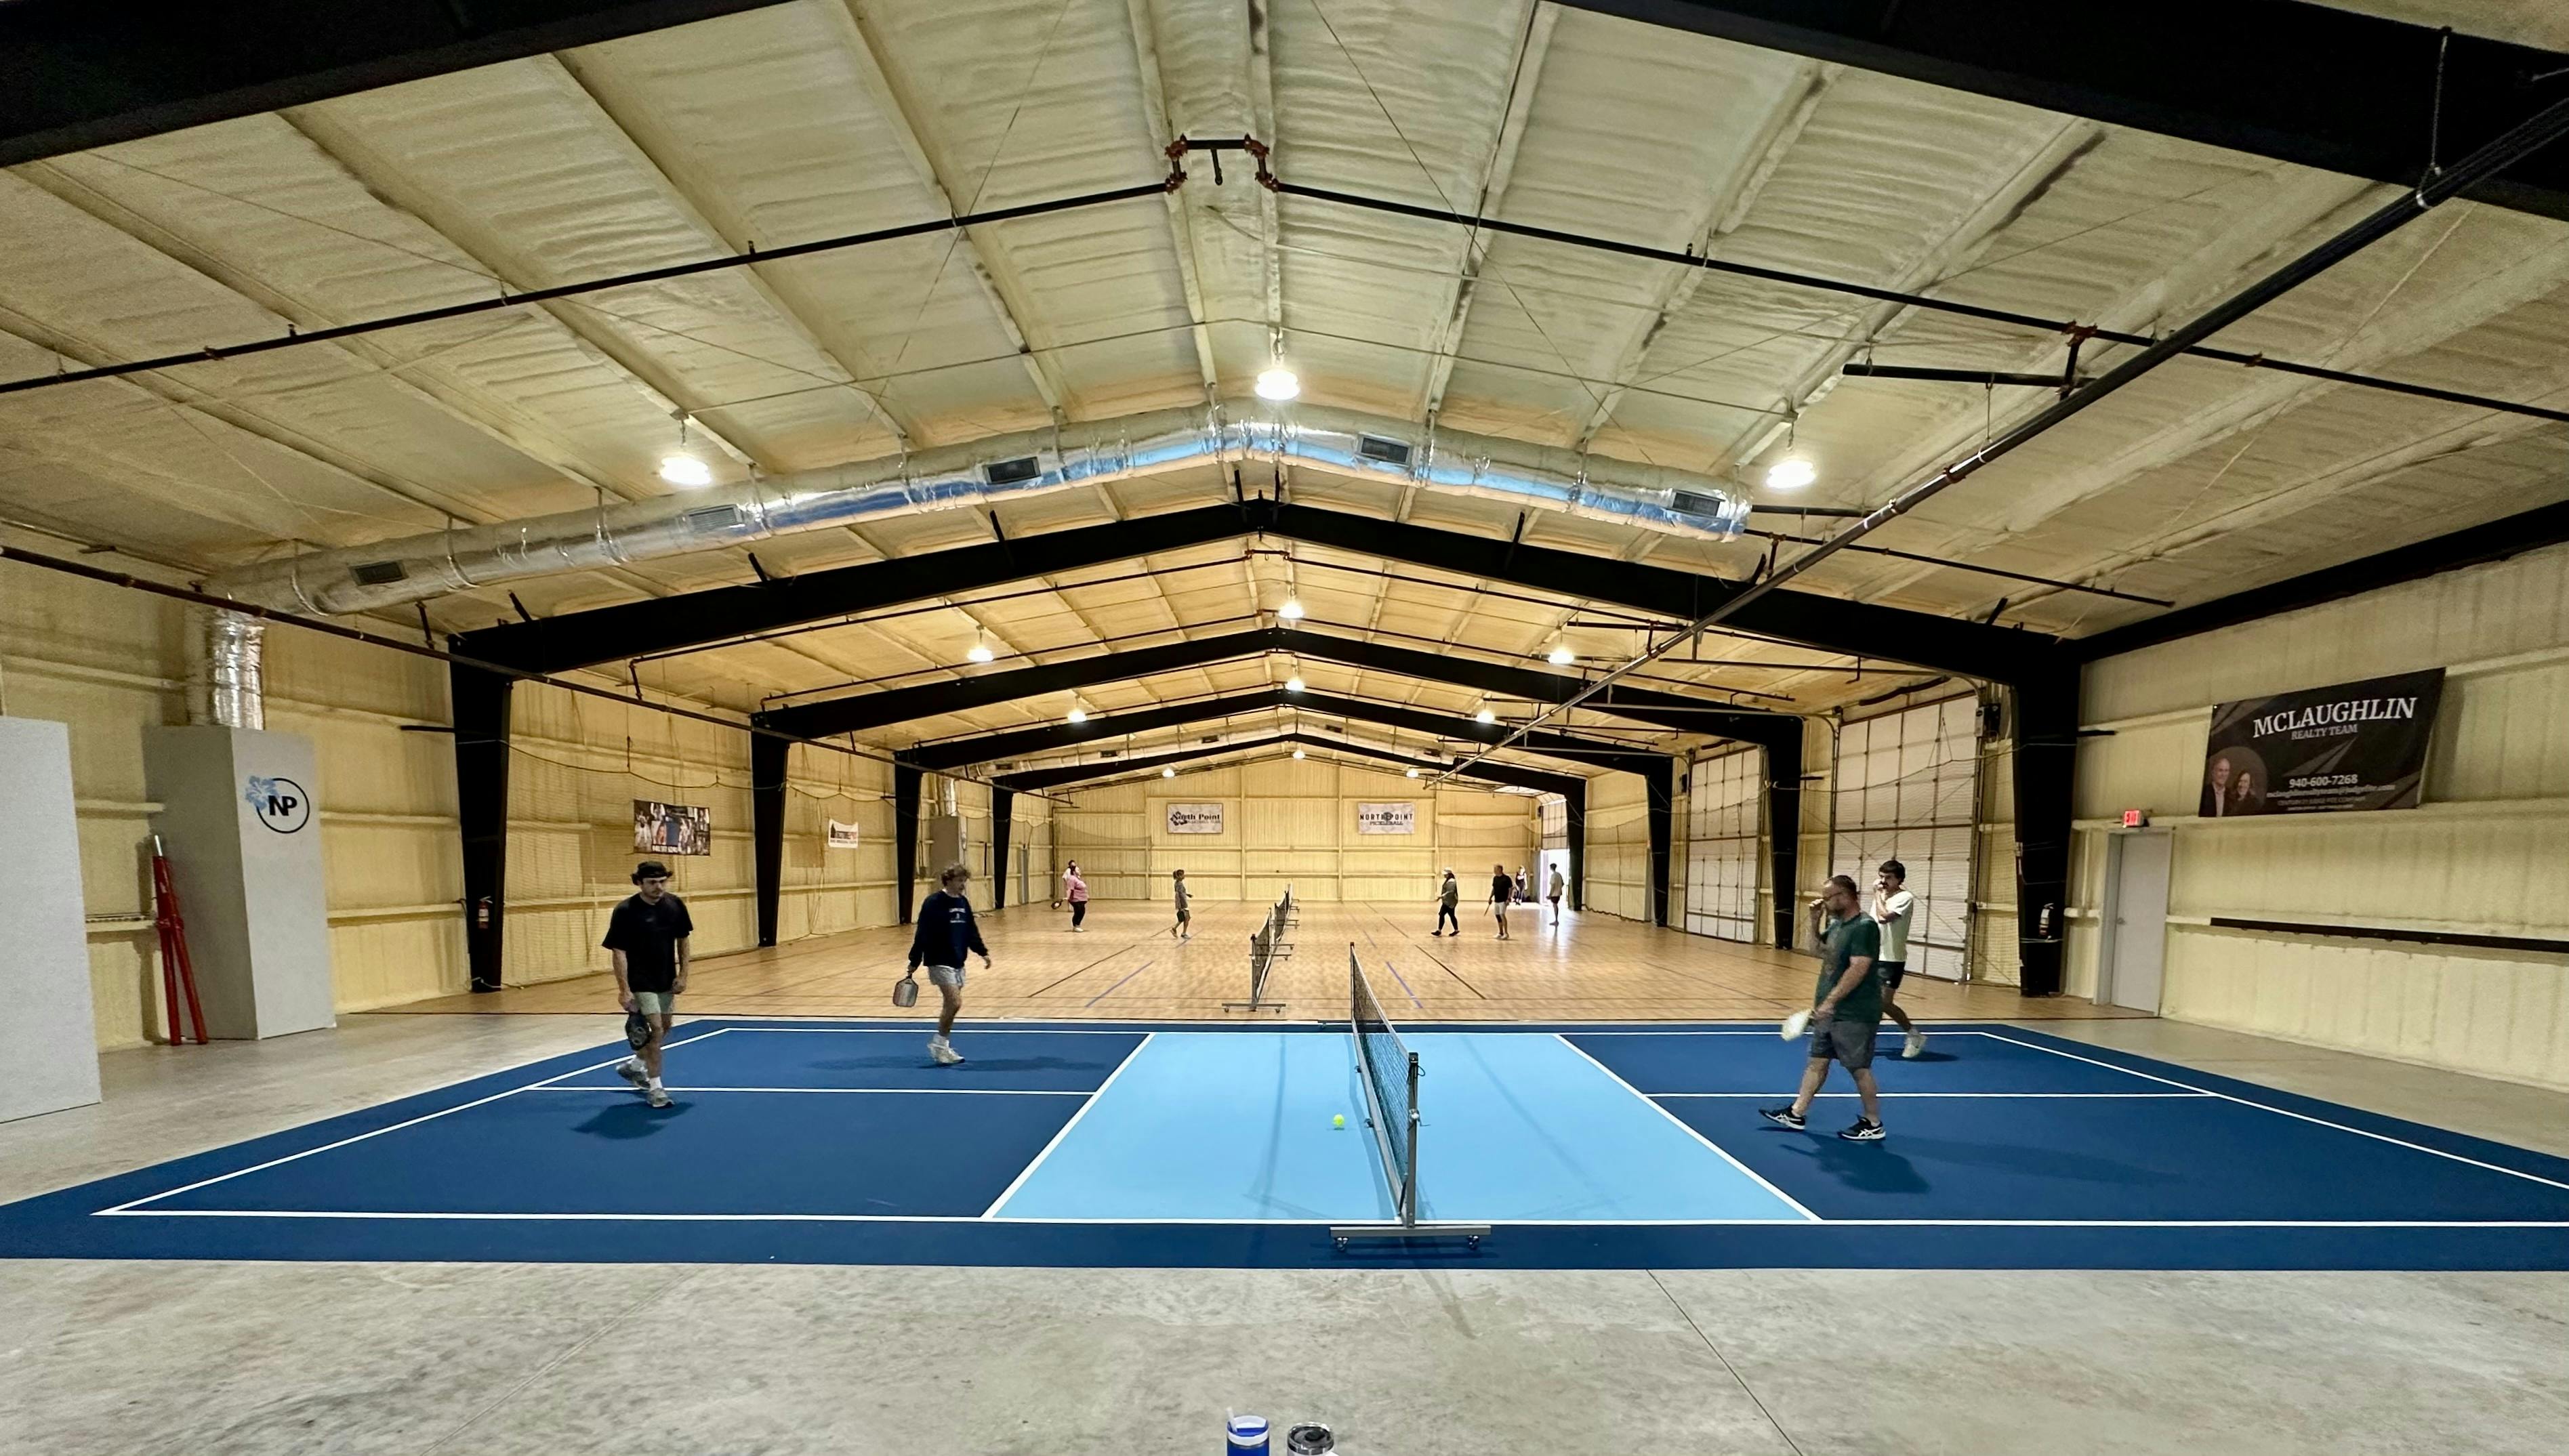 Image 3 of 8 of North Point Pickleball Club court